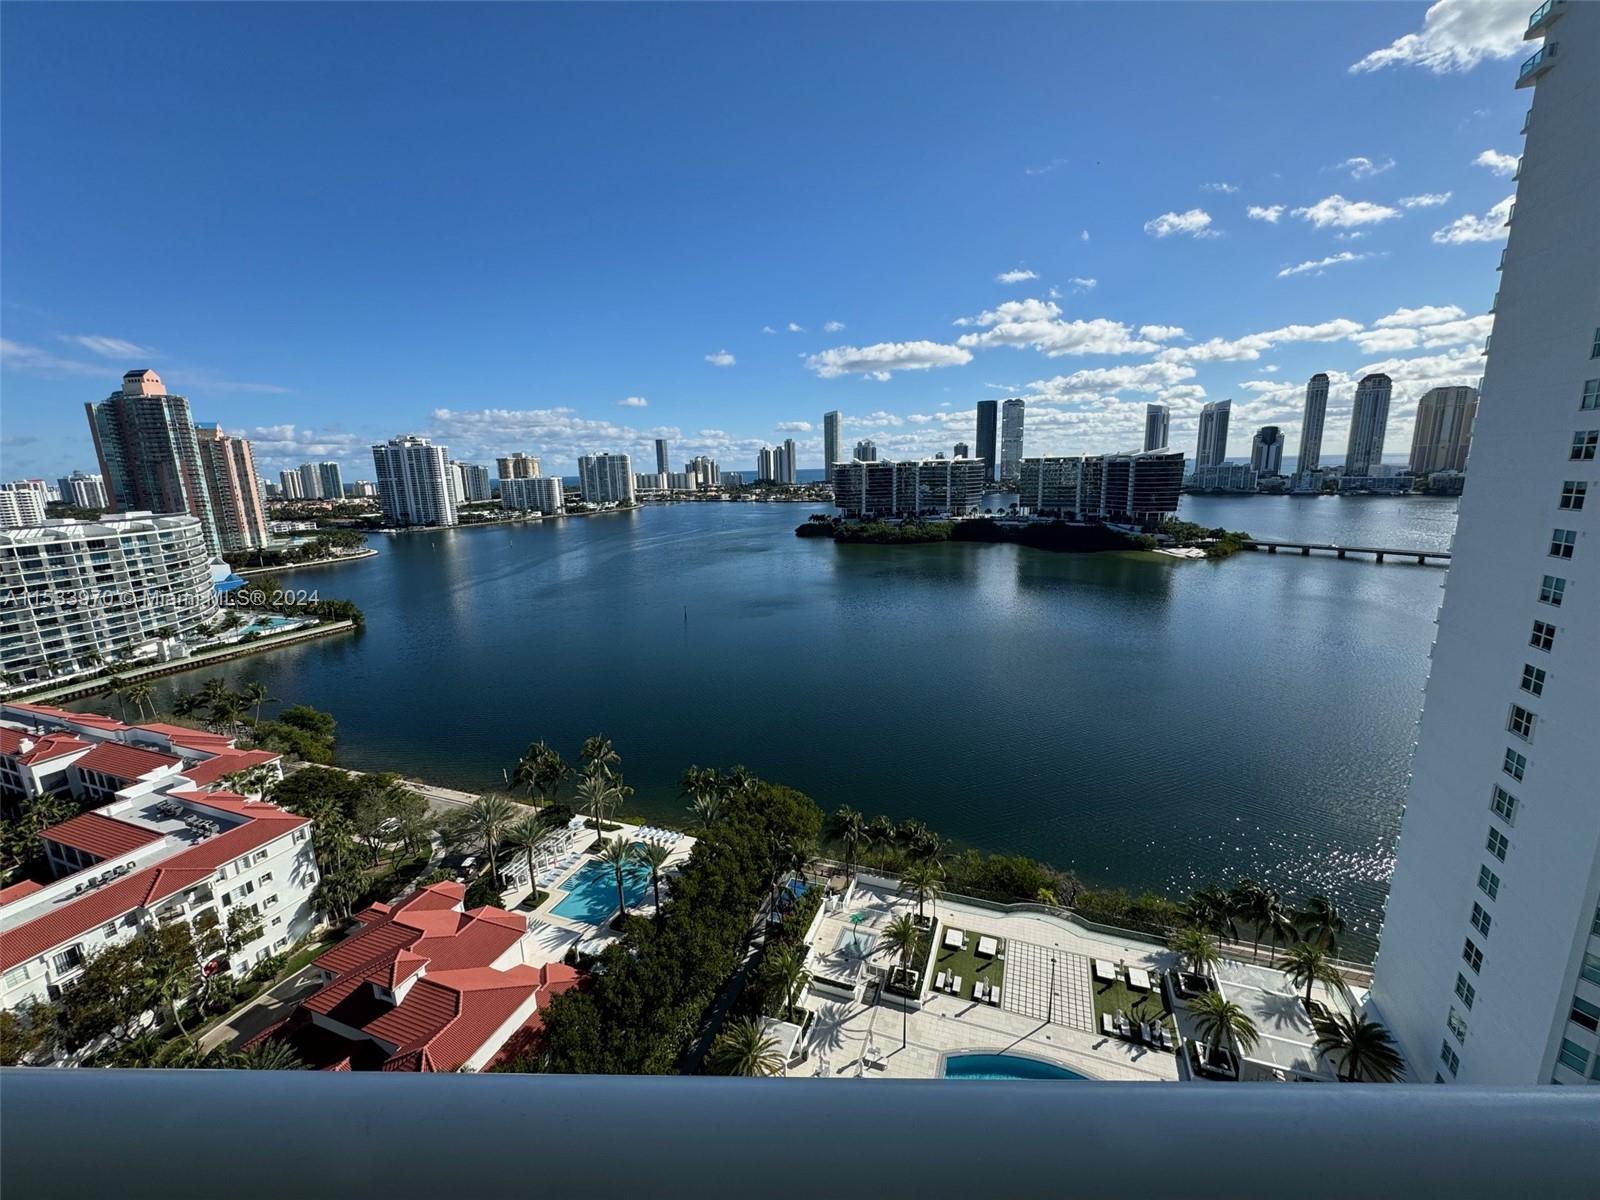 AMAZING CONDO @ PENINSULA II WITH BREATHTAKING VIEWS OF THE BAY AND OCEAN. 2 BEDROOMS/2 +1/2 BATHS +